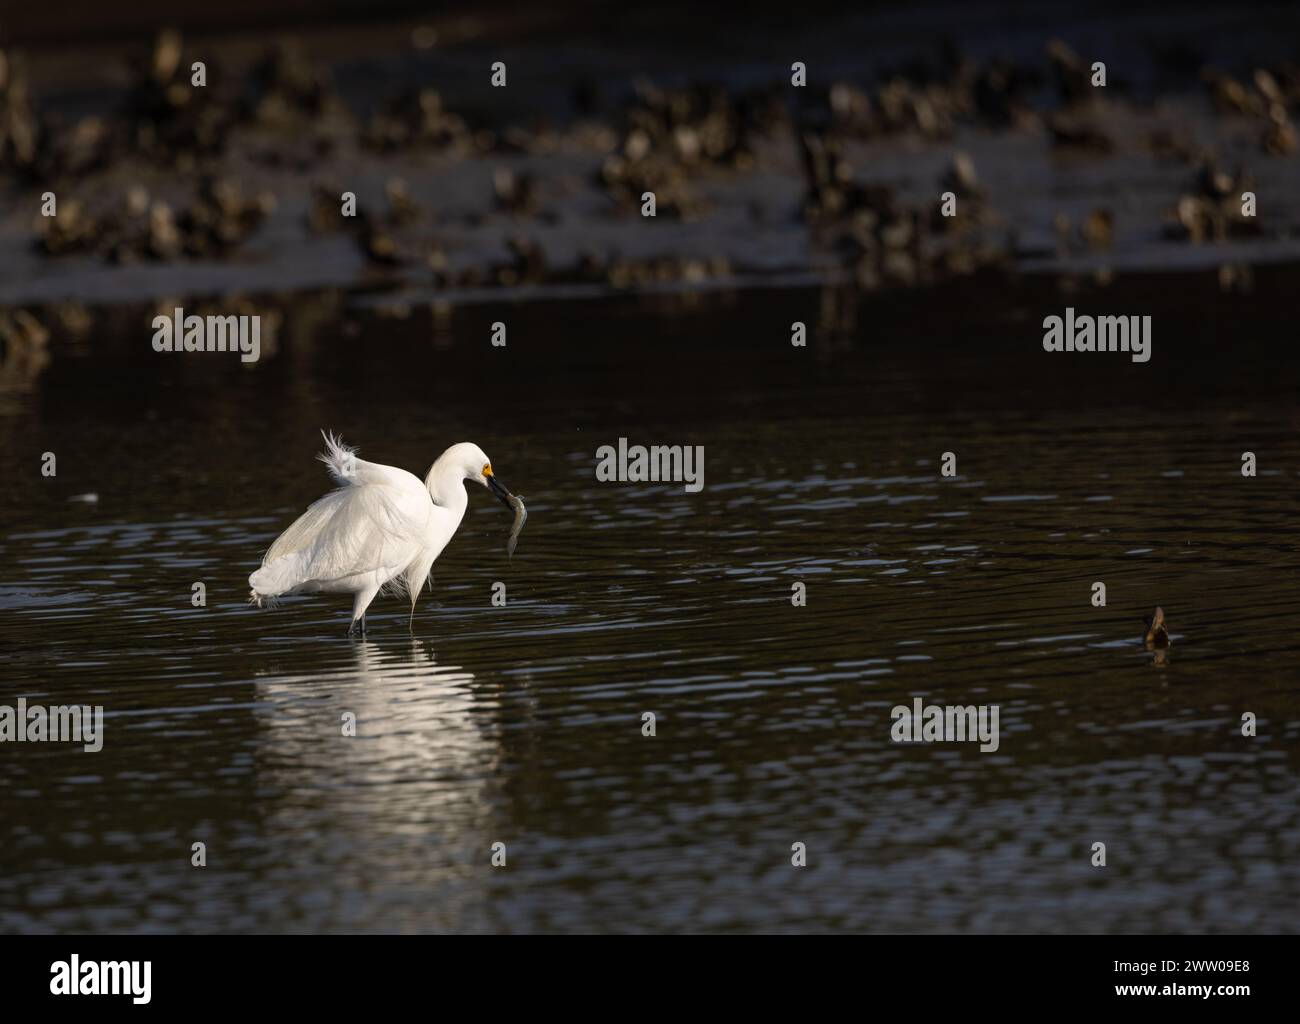 A snowy egret in breeding plumage wading in shallow water with a vertebrate in its bill. Stock Photo